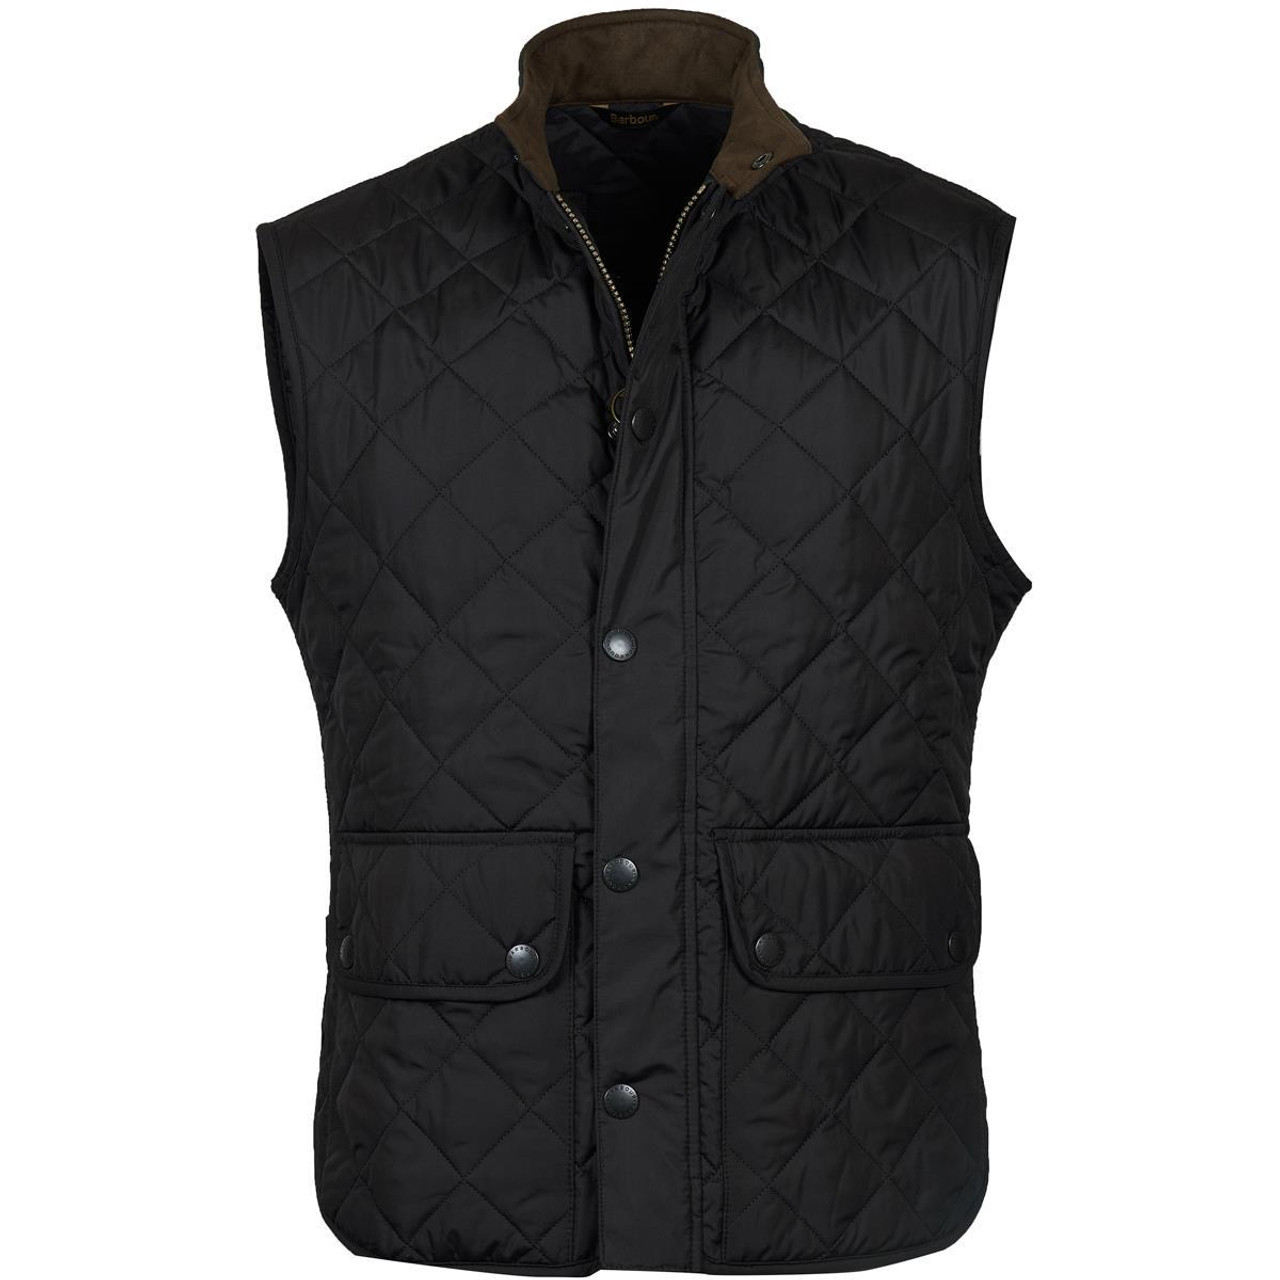 What fabric is used in the Barbour Lowerdale Gilet?